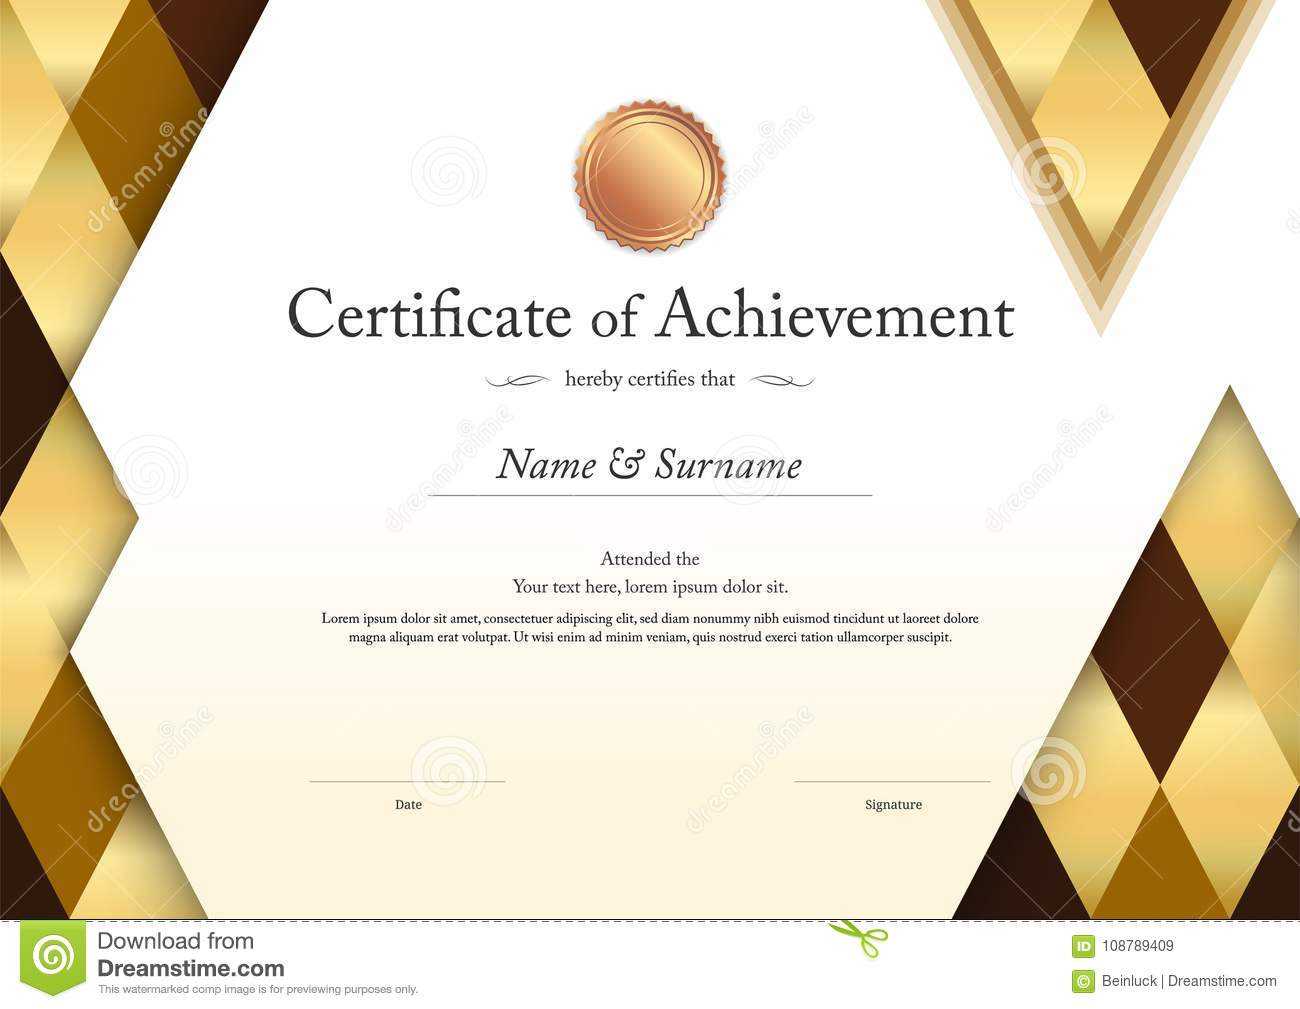 Luxury Certificate Template With Elegant Border Frame Throughout Elegant Certificate Templates Free